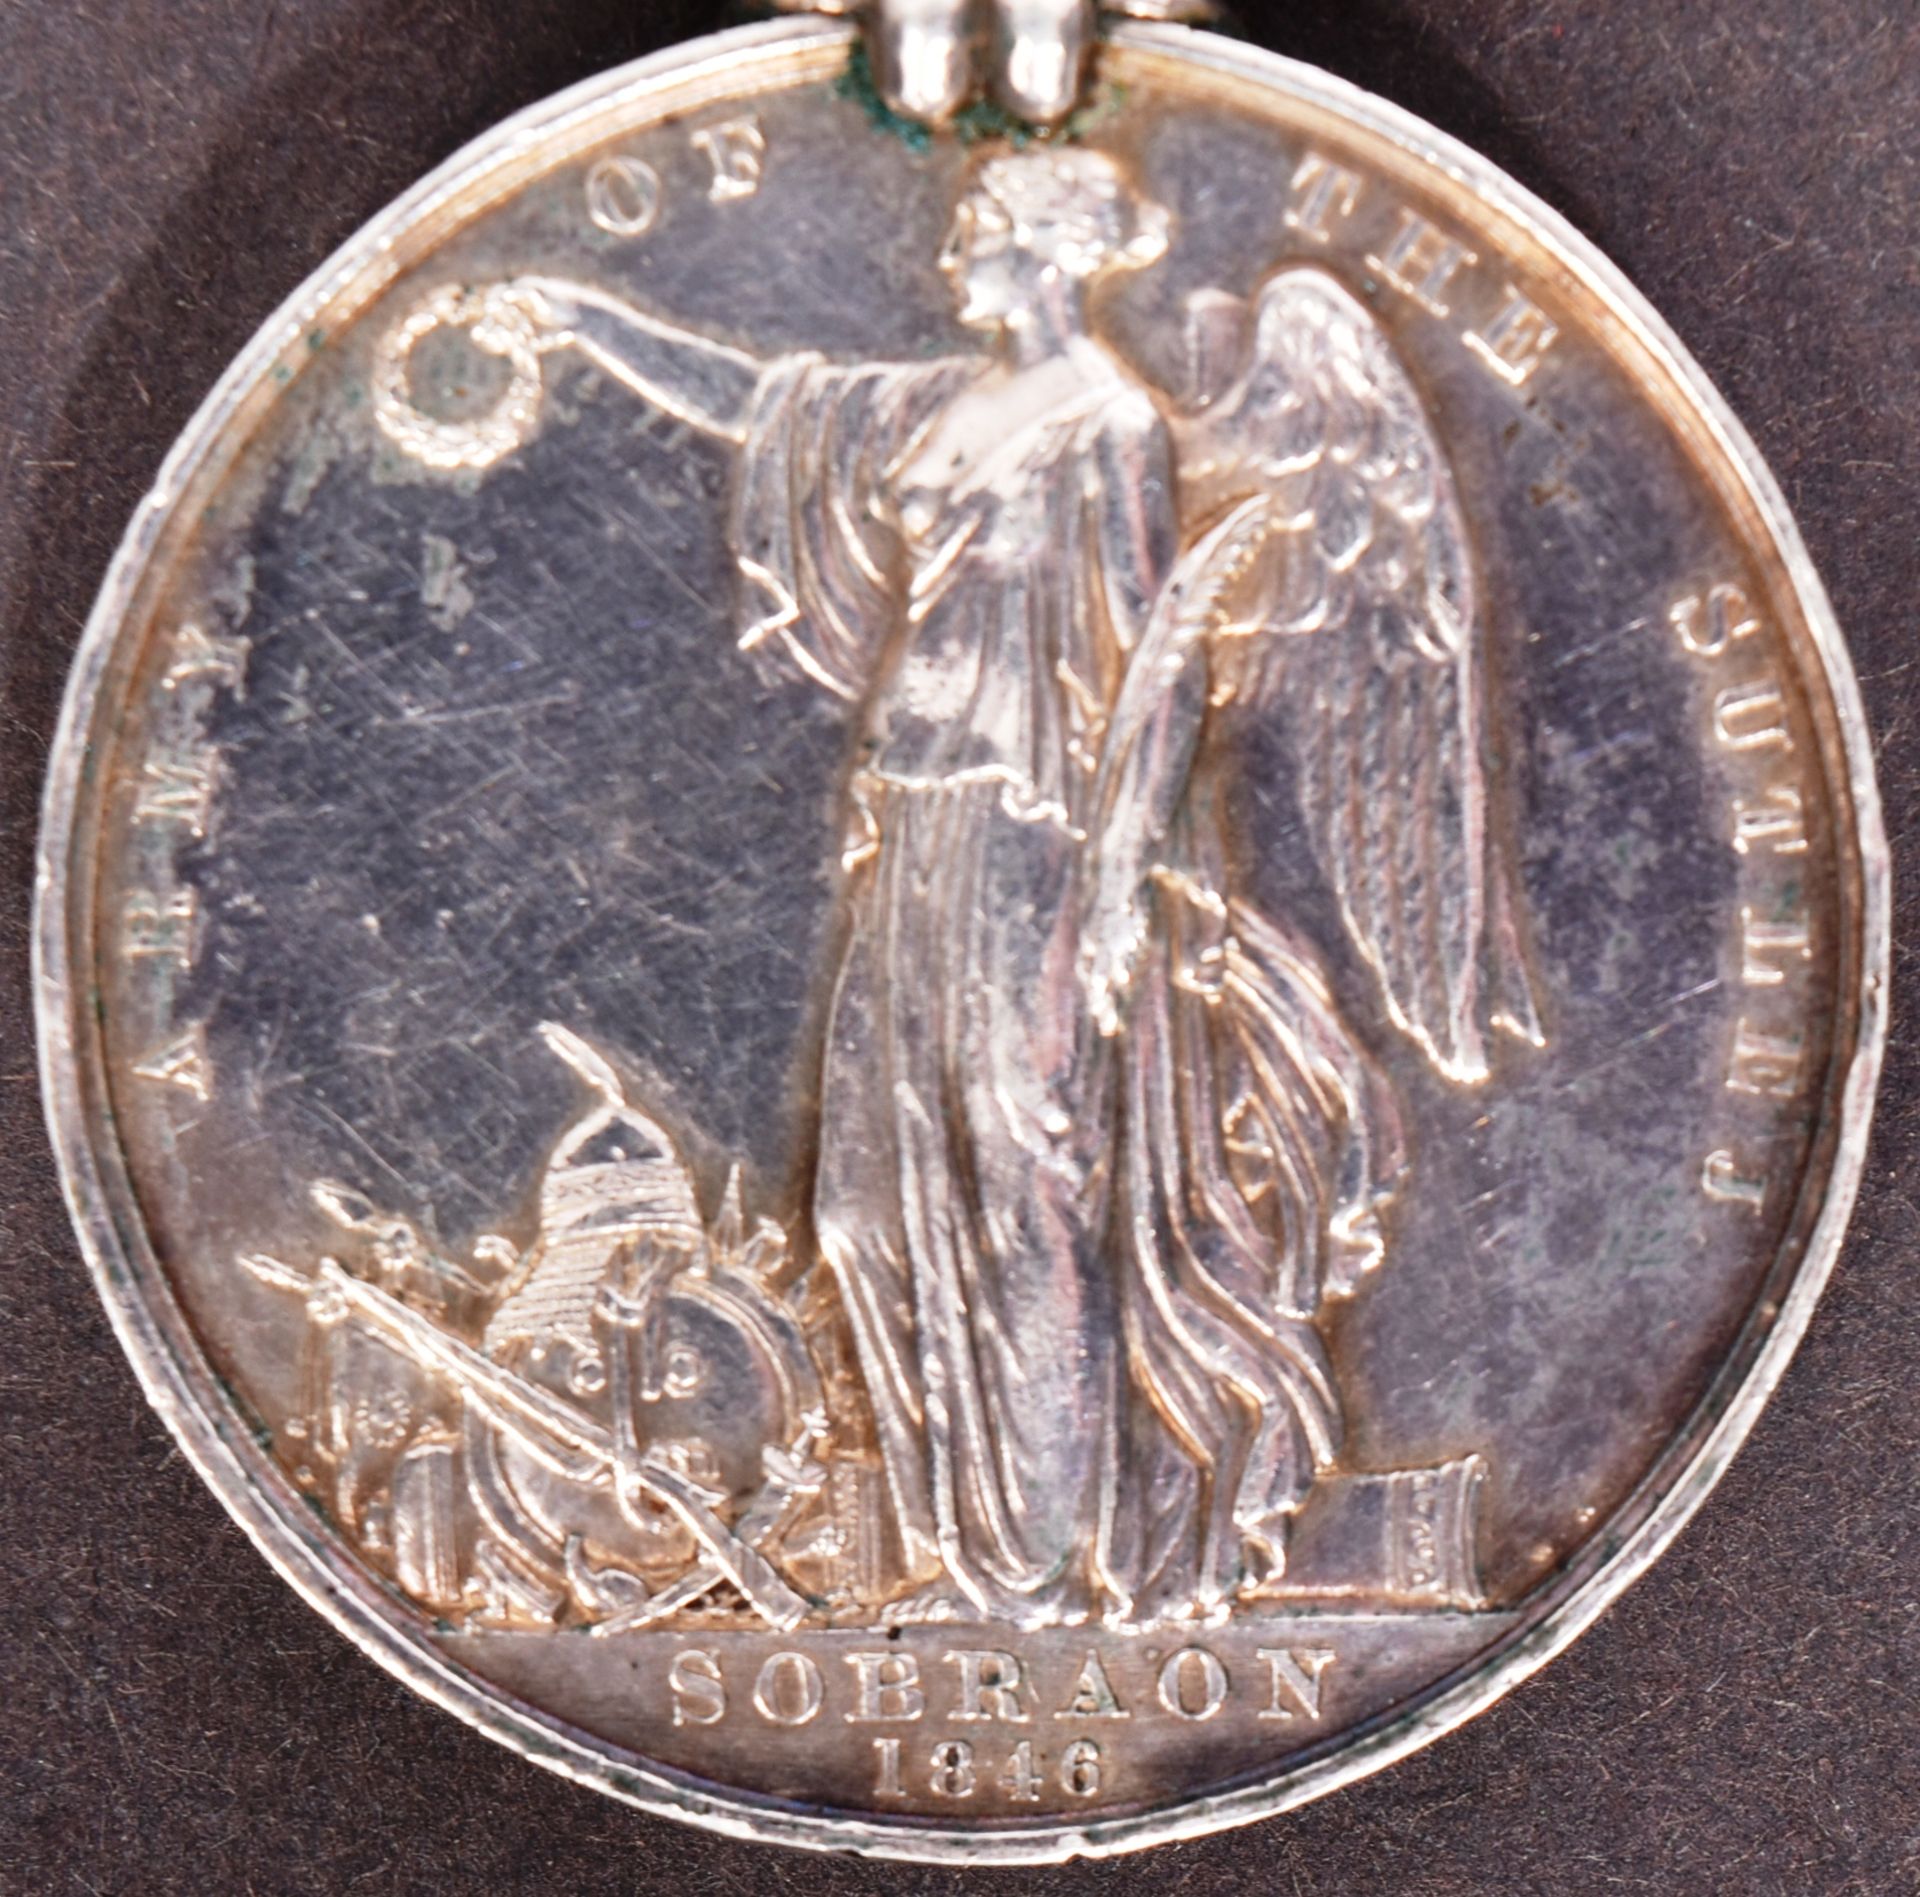 FIRST ANGLO SIKH WAR - SUTLEJ CAMPAIGN MEDAL - Image 2 of 6